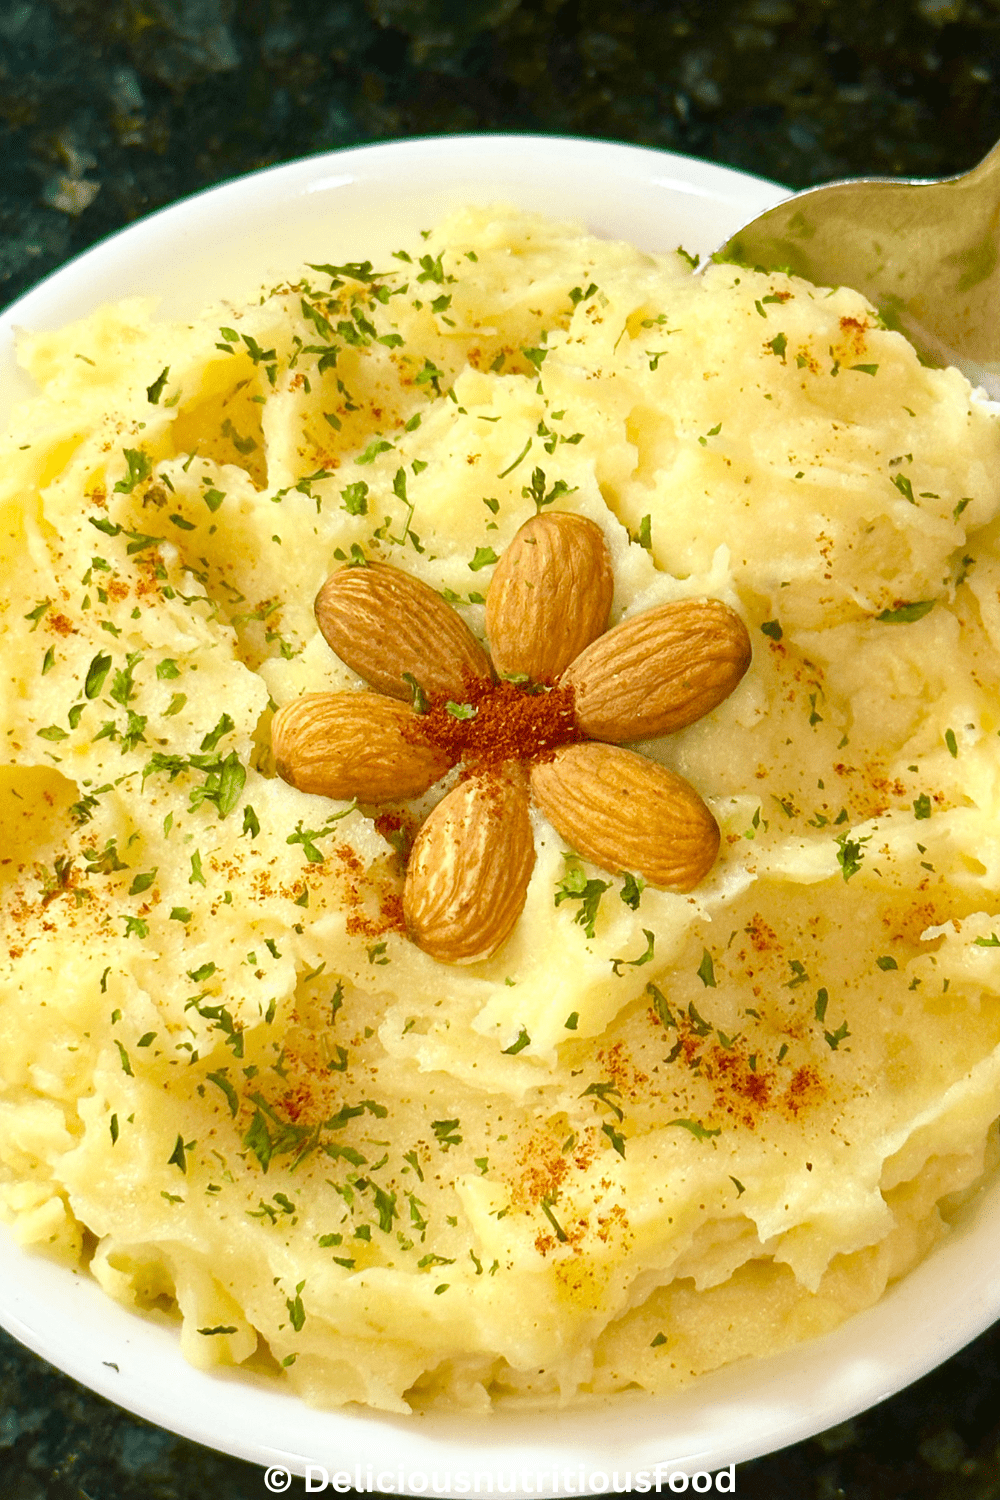 Almond milk mashed potatoes served on a white bowl.